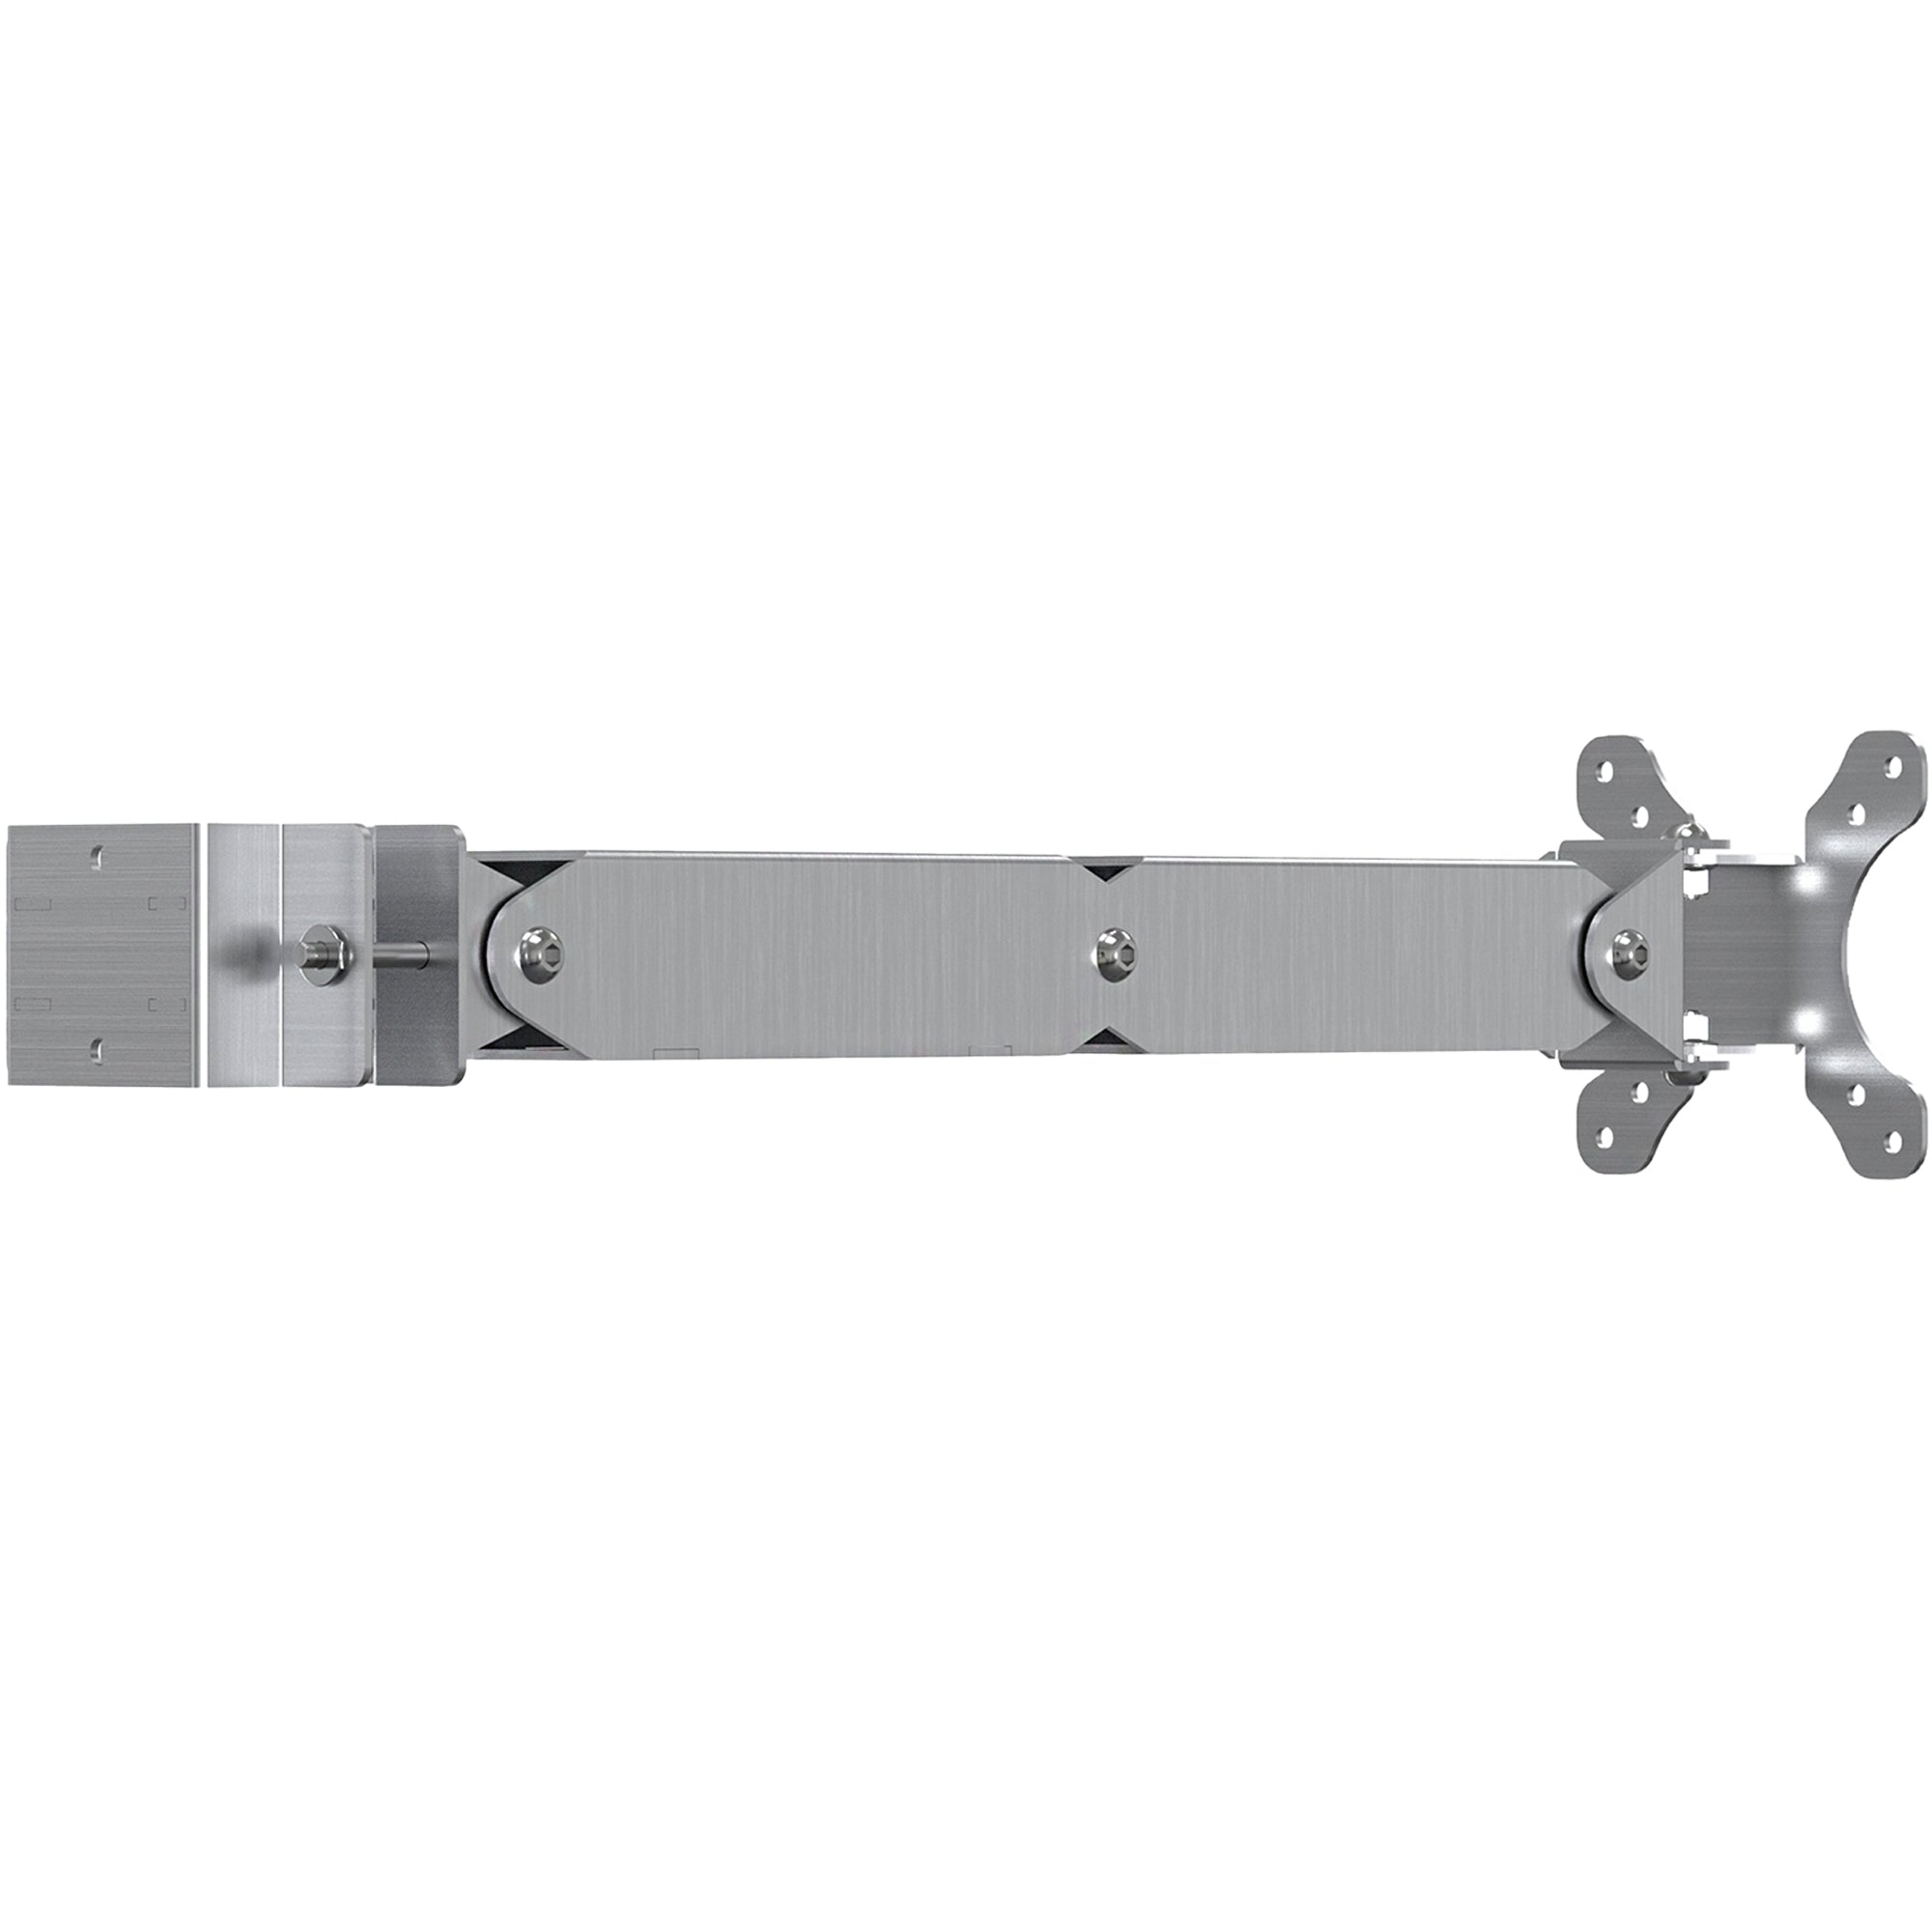 Stainless Steel Pole Mount with Articulating Arm for CTA Digital's Stainless-Steel Enclosures